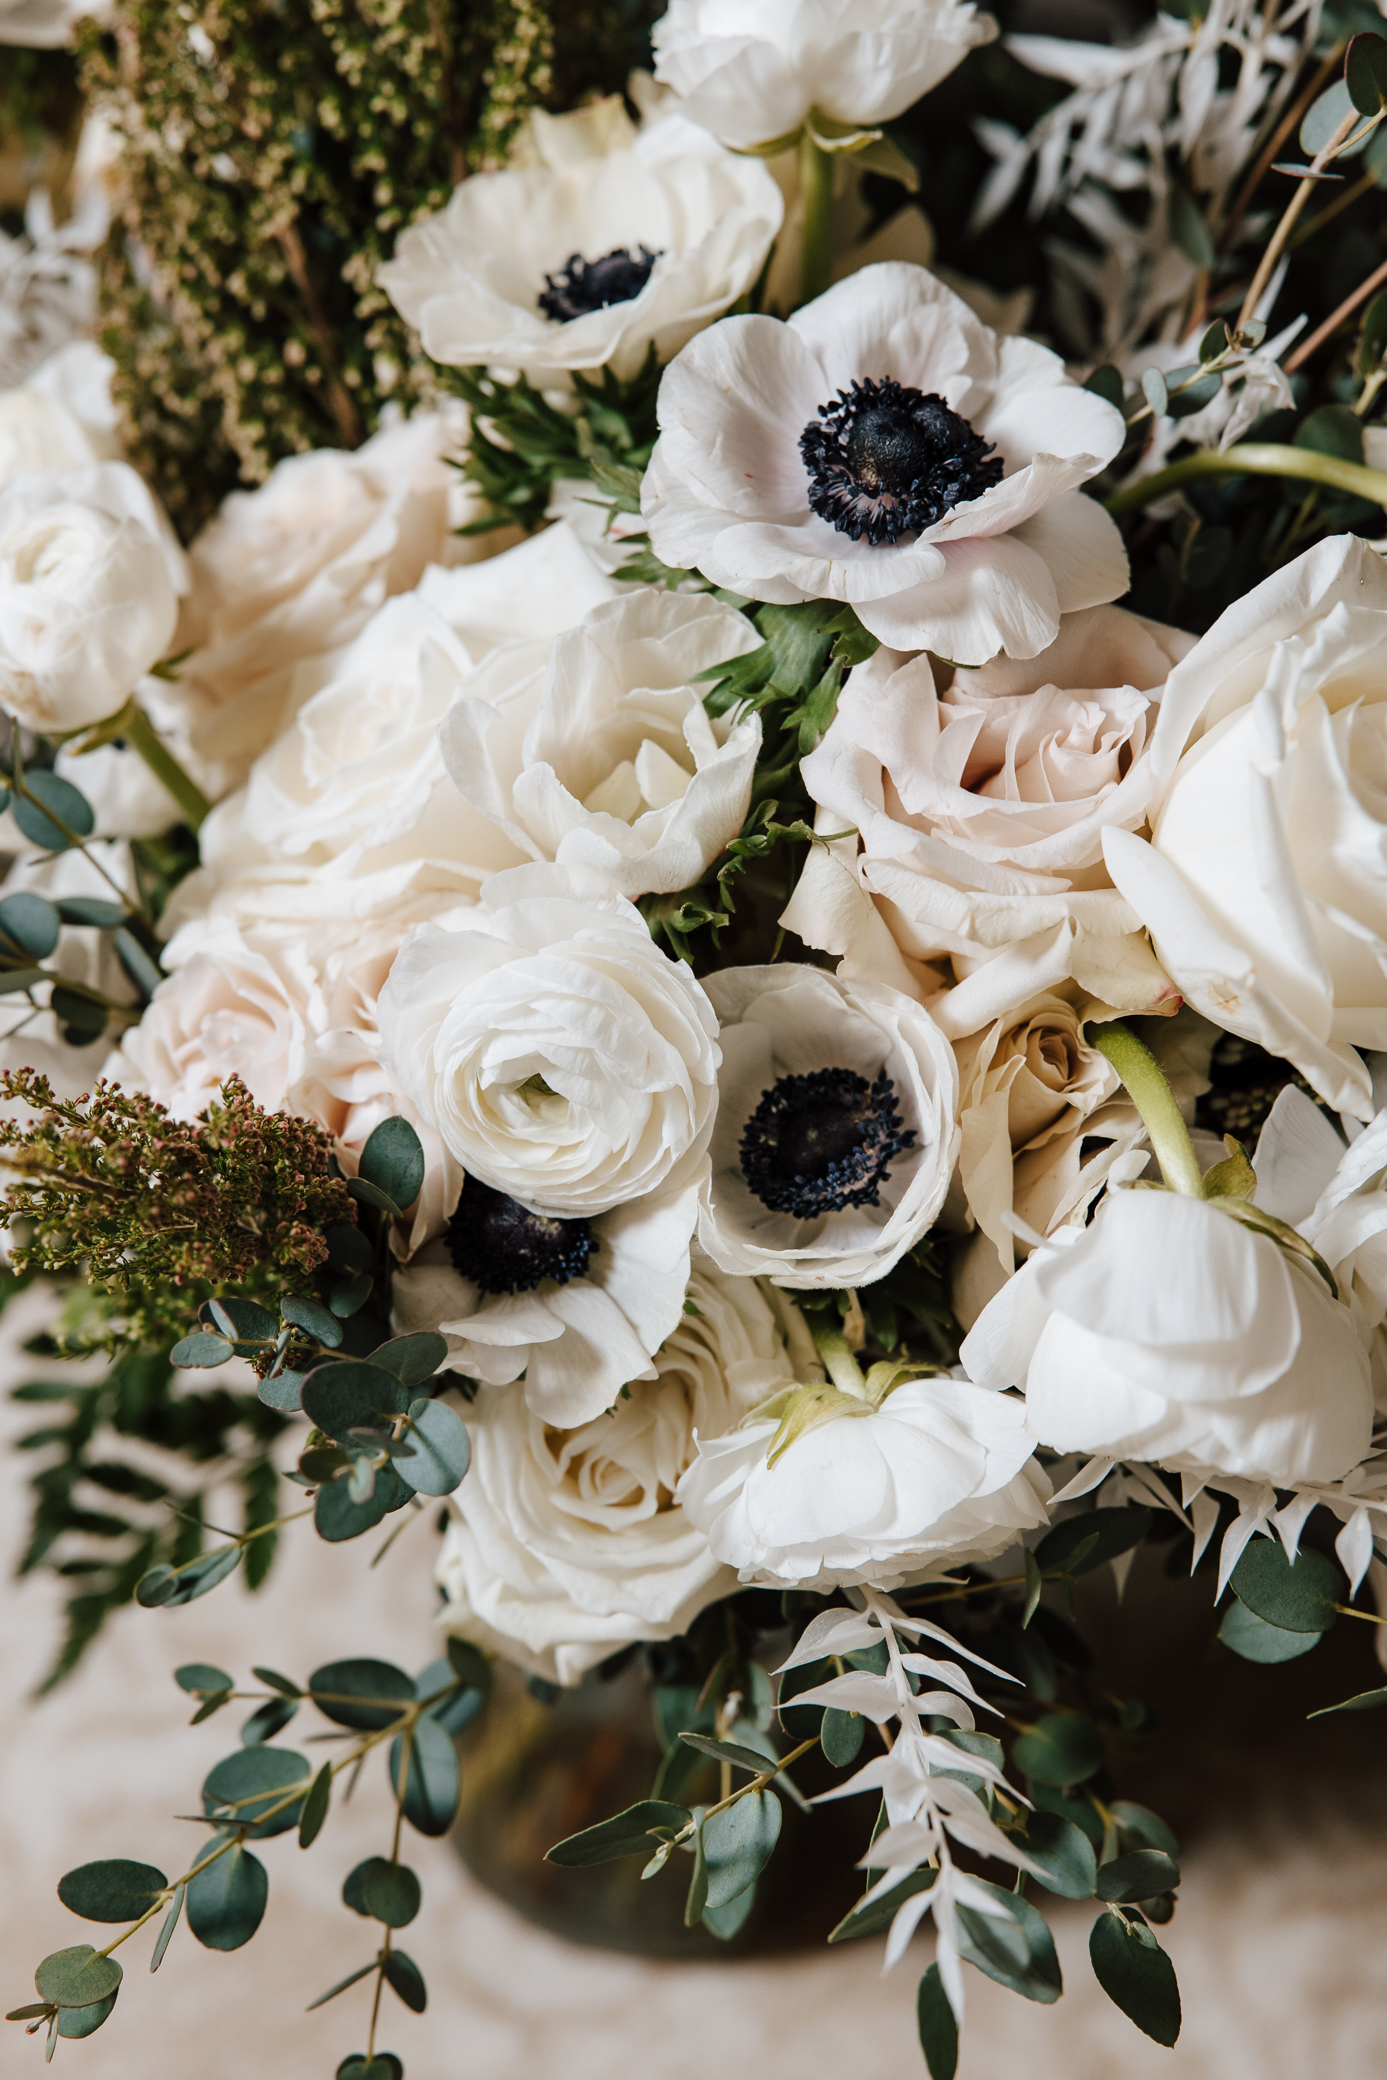 Peonies, ranunculus, white roses, and greenery make up the bride's bouquet.